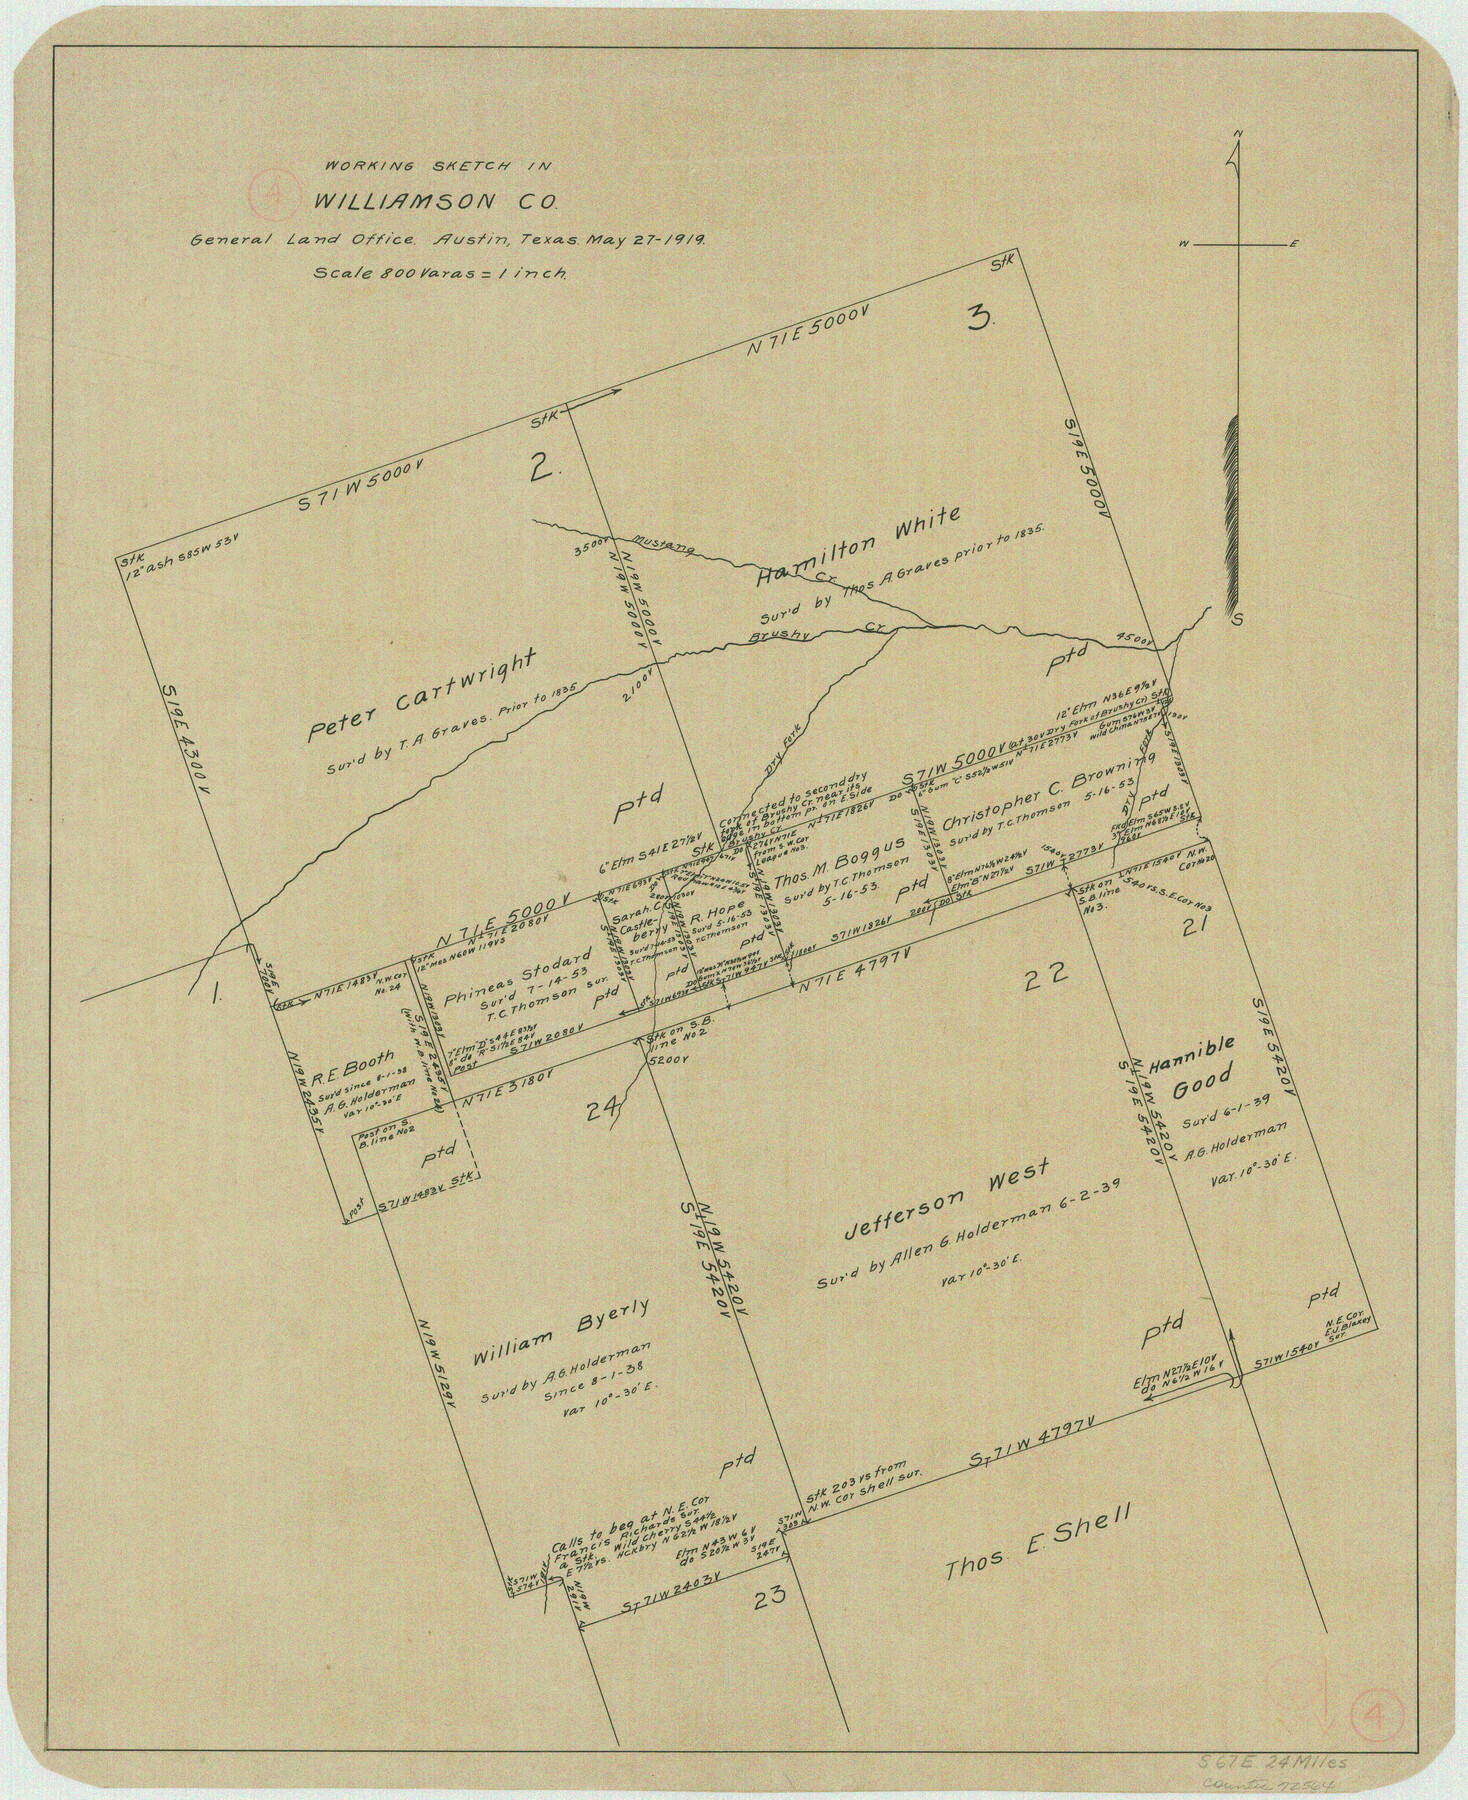 72564, Williamson County Working Sketch 4, General Map Collection